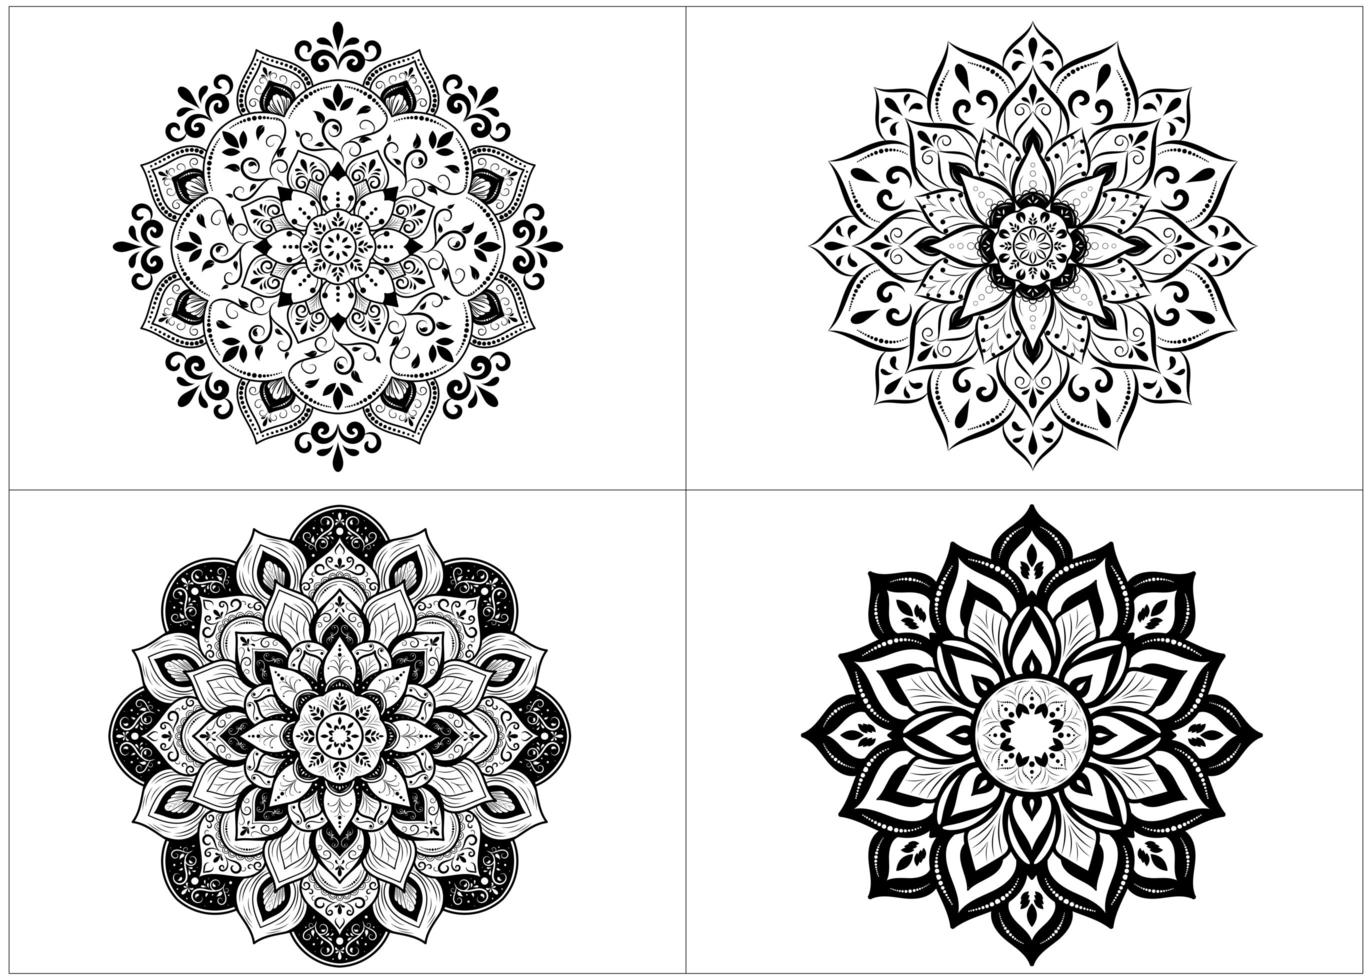 Set of round mandalas in black and white vector